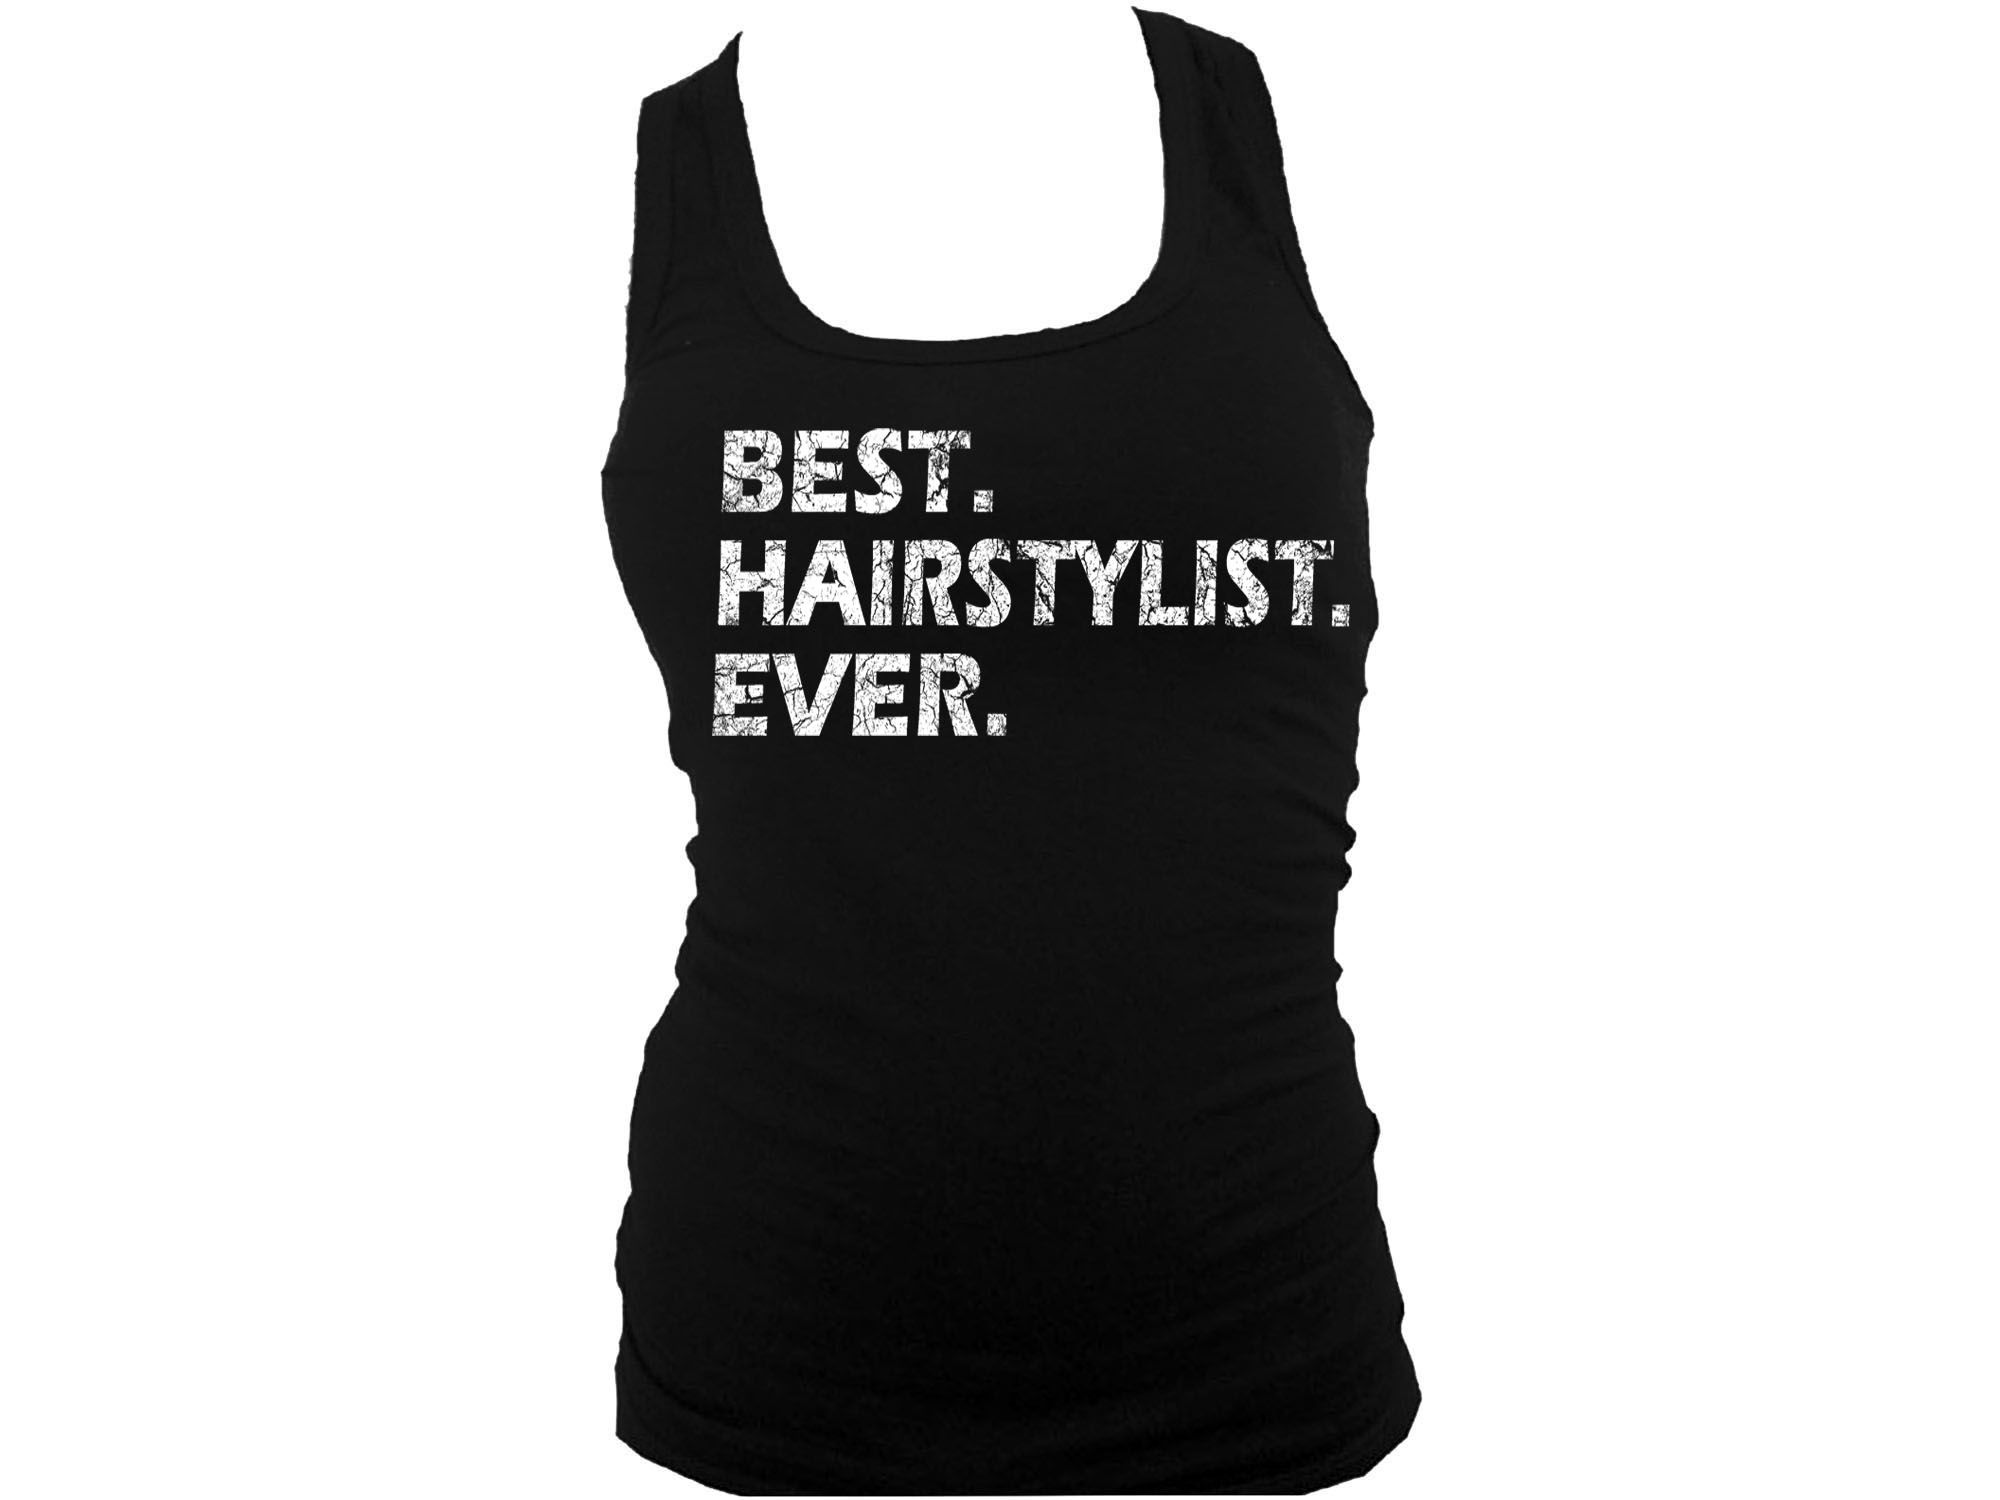 Best Hairstylist ever distressed print women tank top S/M